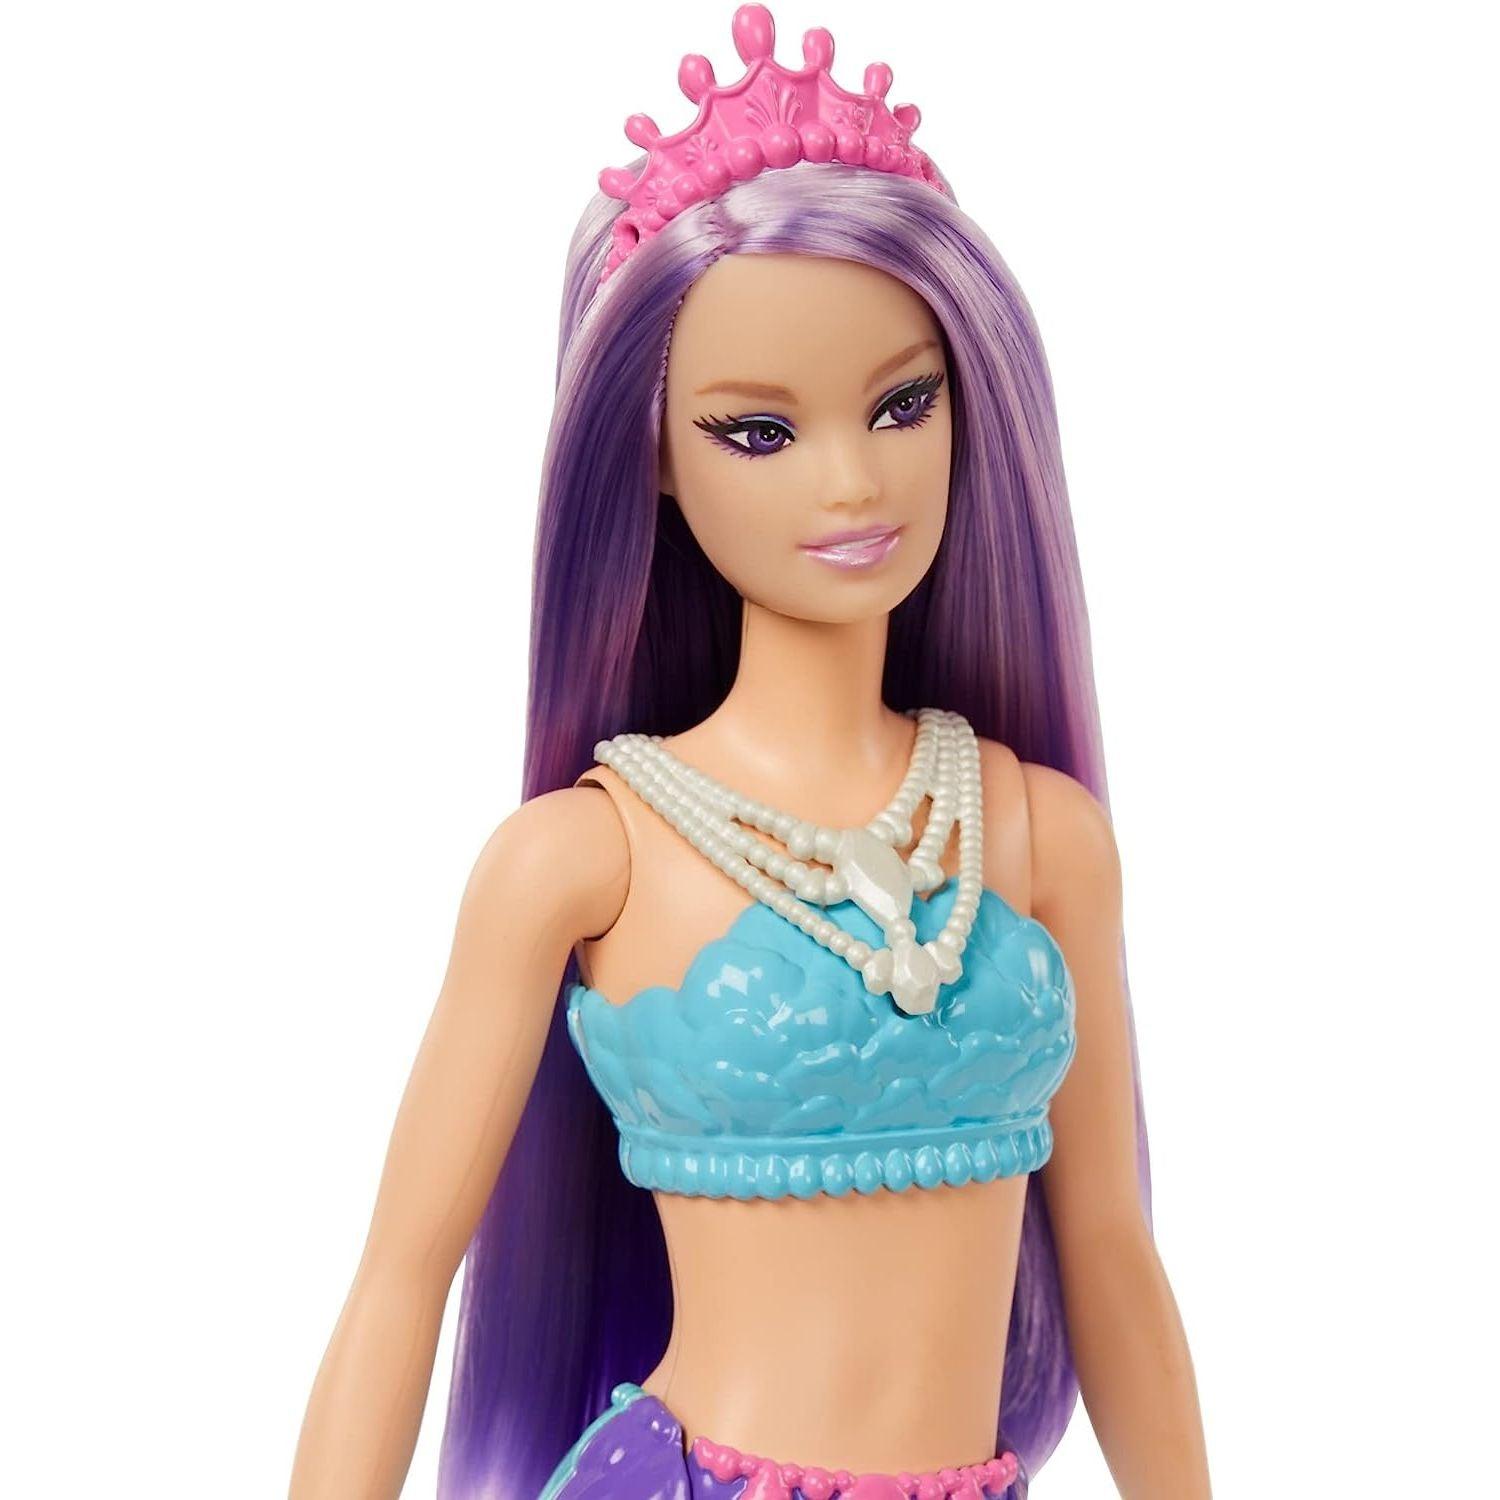 Barbie Dreamtopia Mermaid Doll with Purple Hair, Blue & Purple Ombre Tail & Tiara Accessory - BumbleToys - 5-7 Years, Barbie, Fashion Dolls & Accessories, Girls, Mermaid, Pre-Order